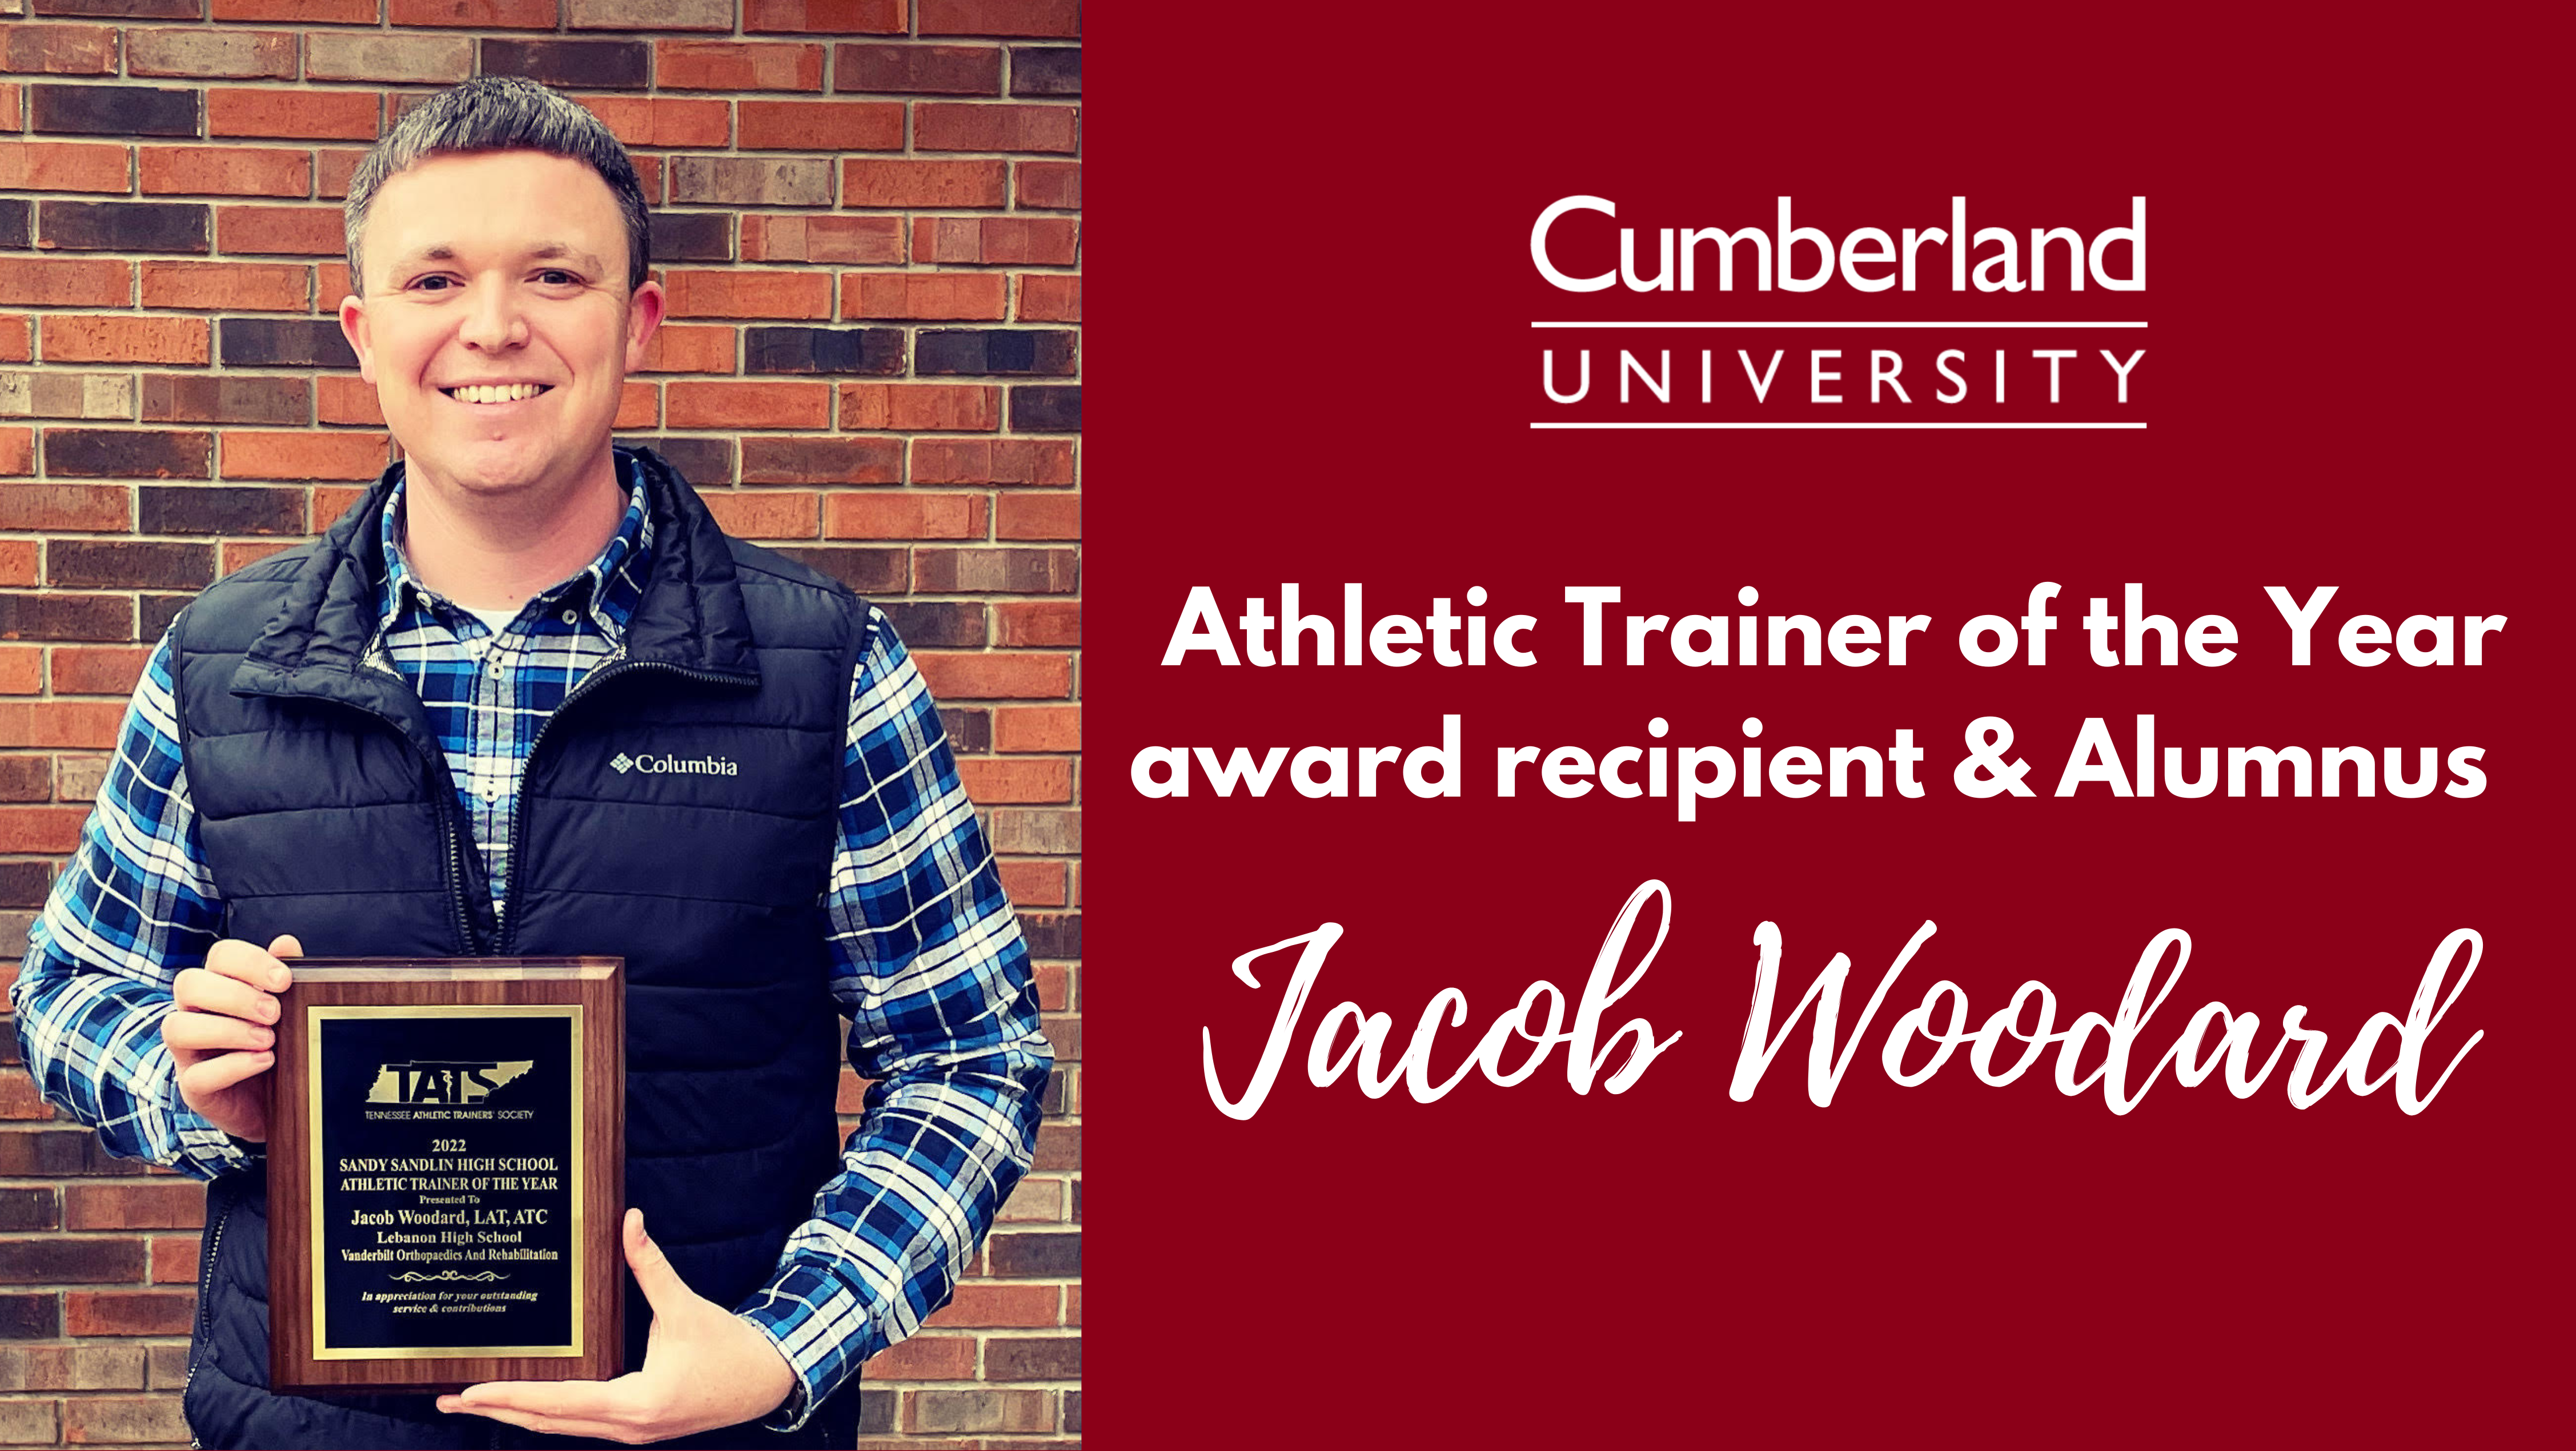 Athletic Trainer of the Year Jacob Woodard